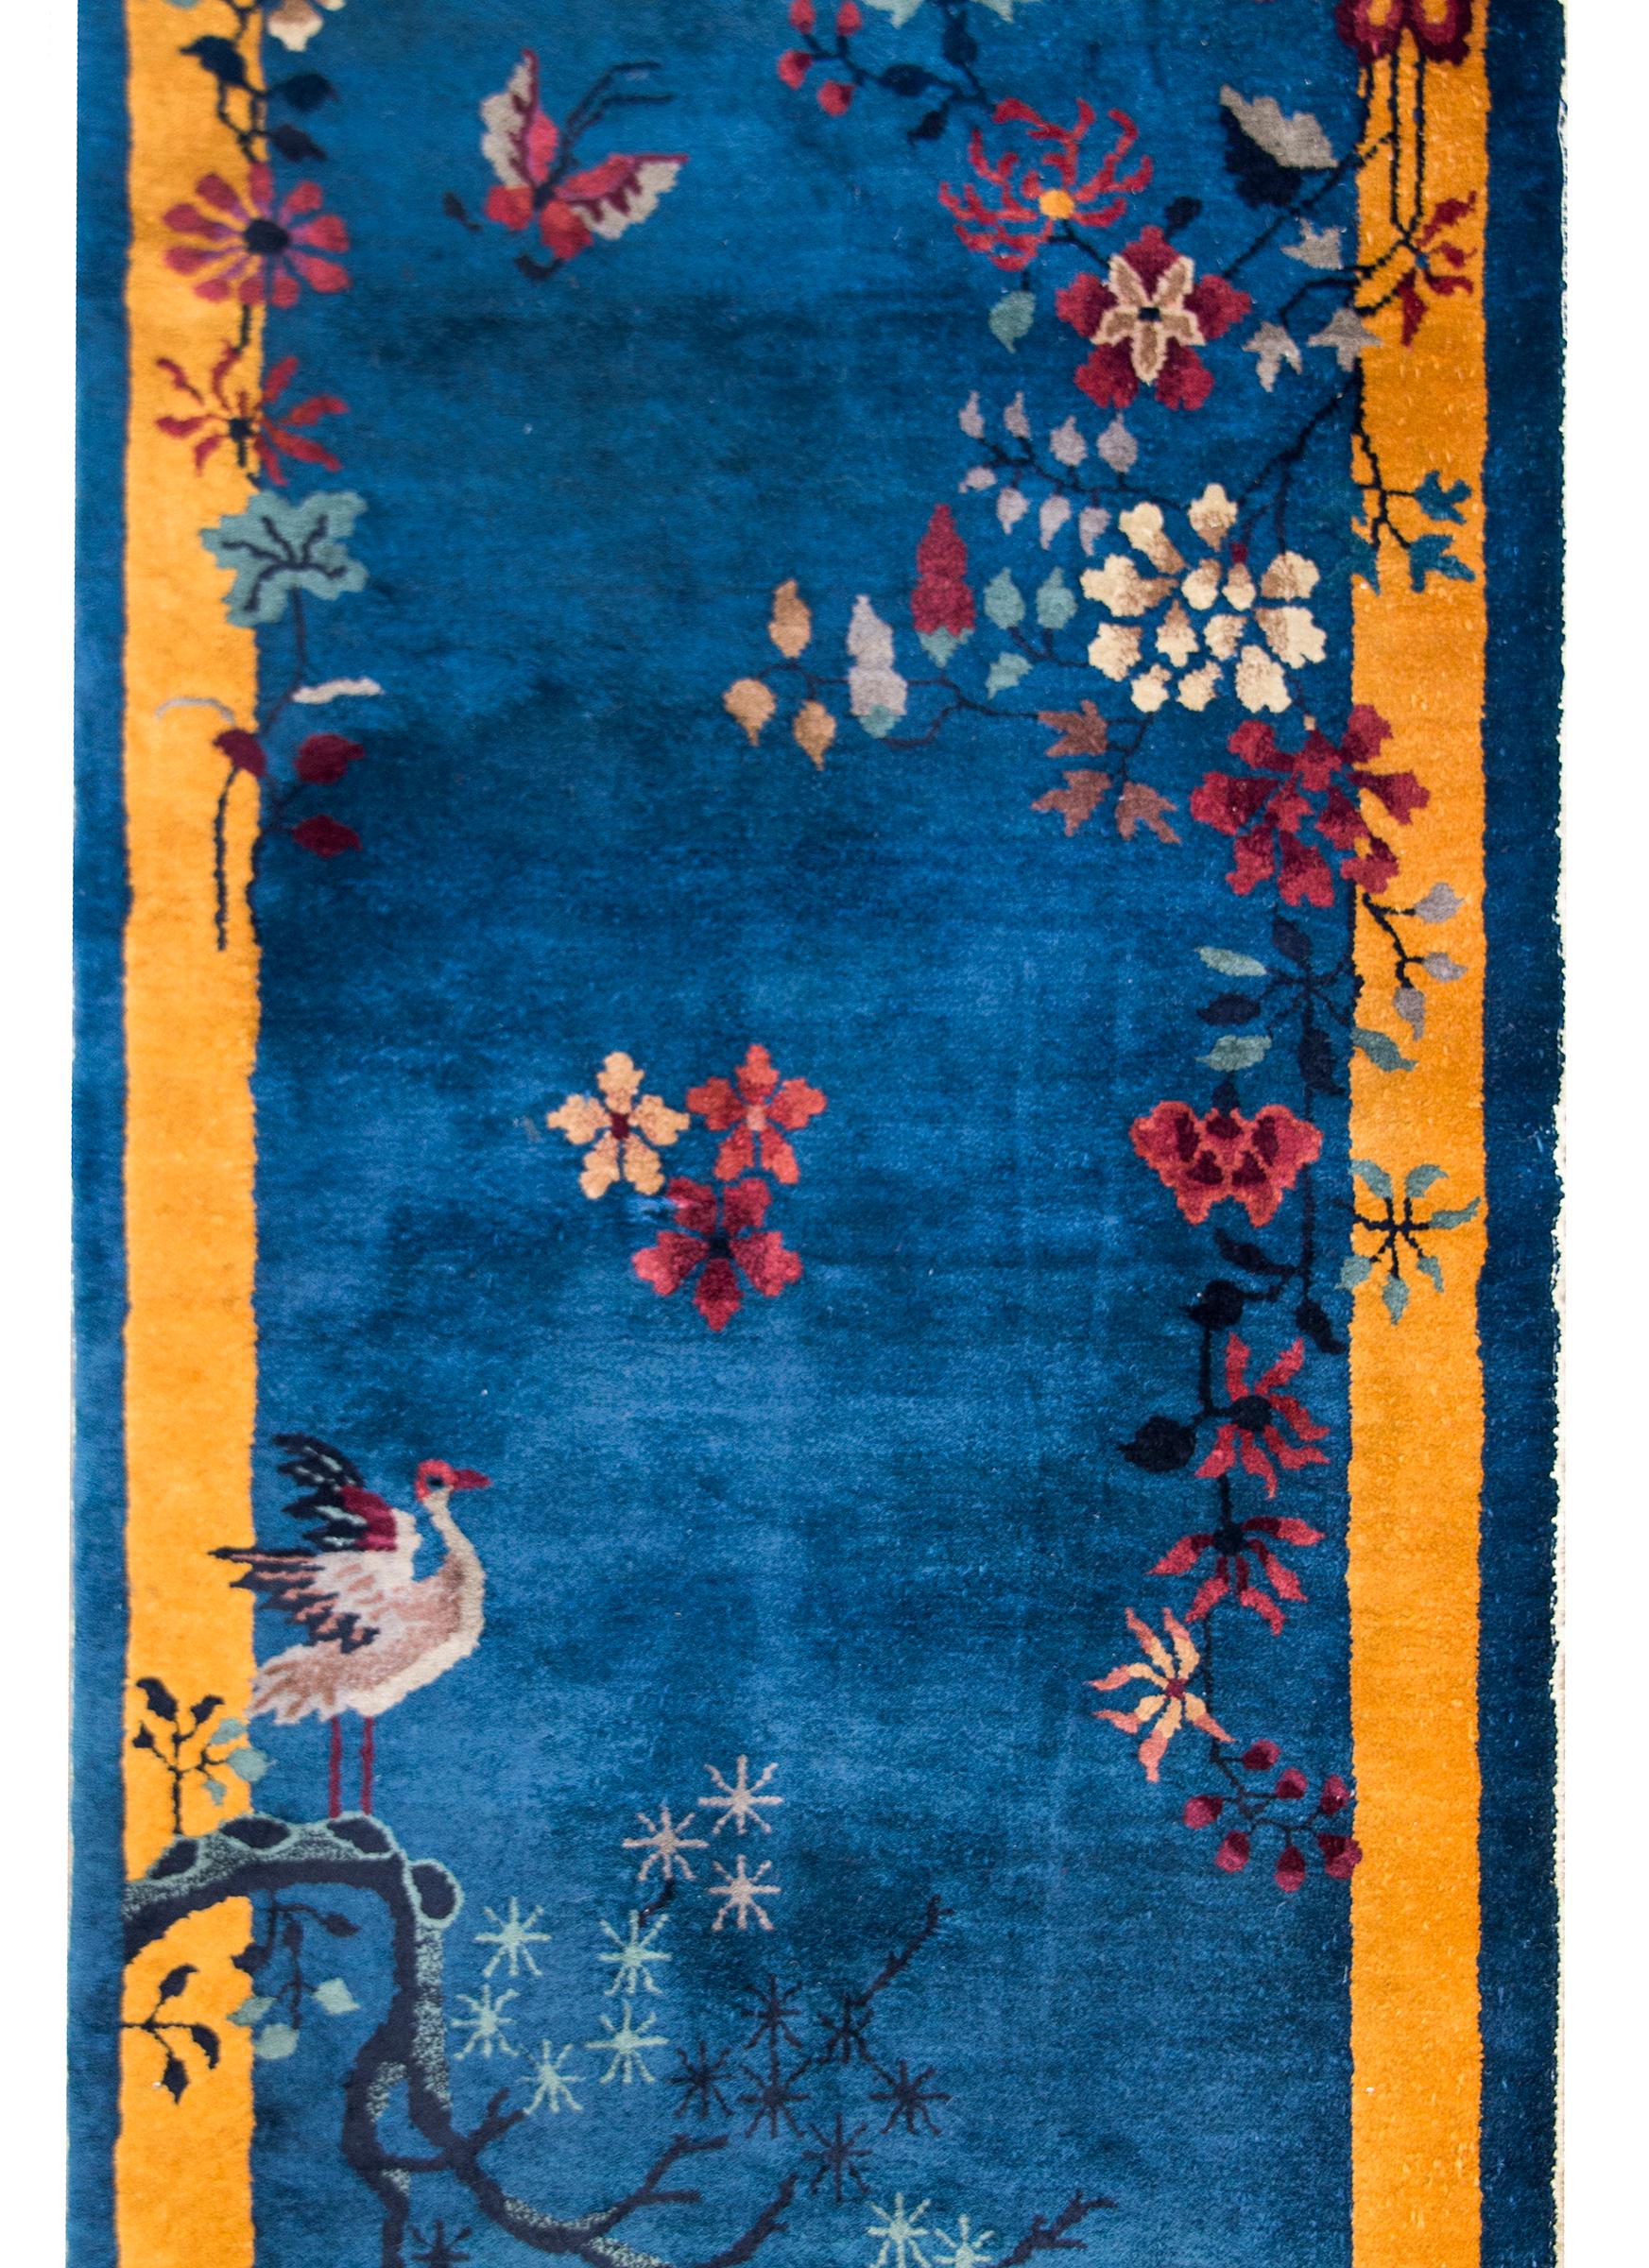 A beautiful early 20th century Chinese Art Deco rug with a brilliant blue field surrounded by a wide gold striped border, and all overlaid with multi-colored peonies, chrysanthemum, and a pine tree with a crane resting on its branch in the lower